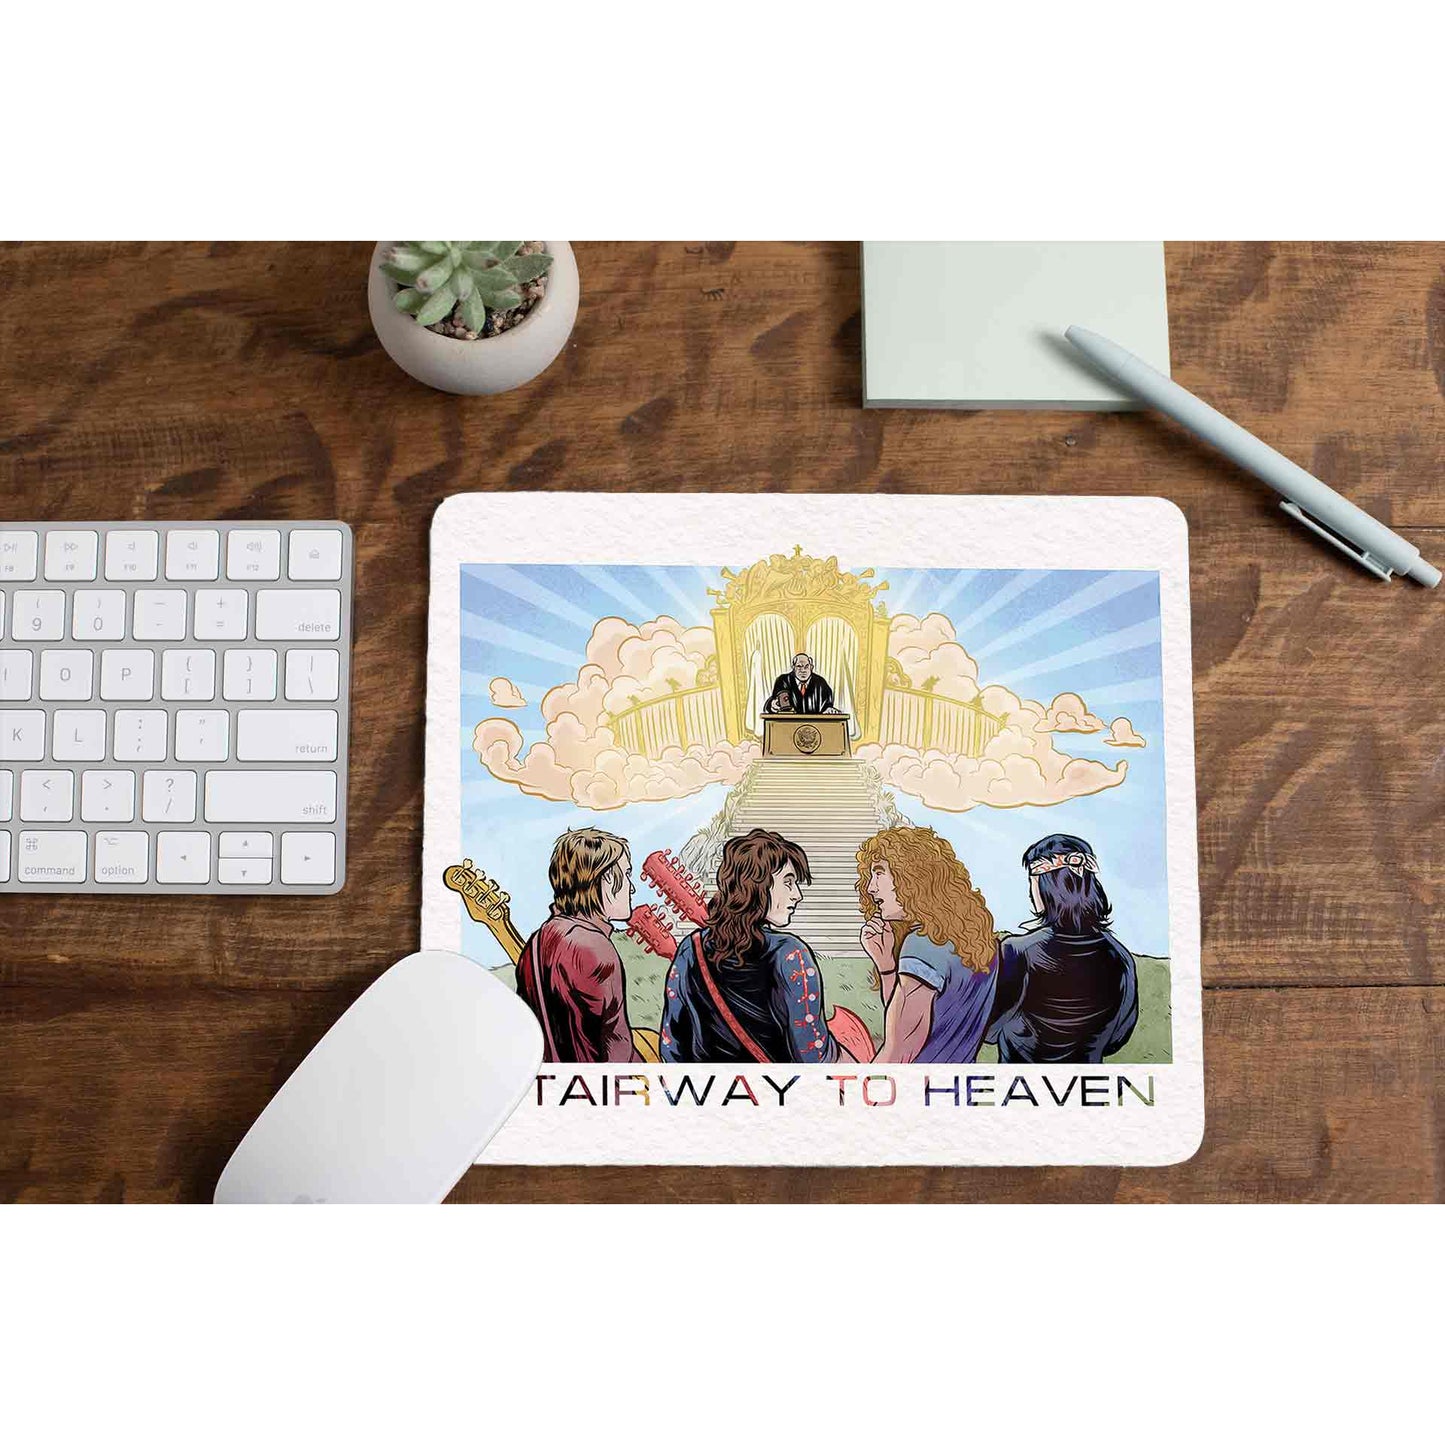 Led Zeppelin Mousepad - Stairway To Heaven The Banyan Tee TBT